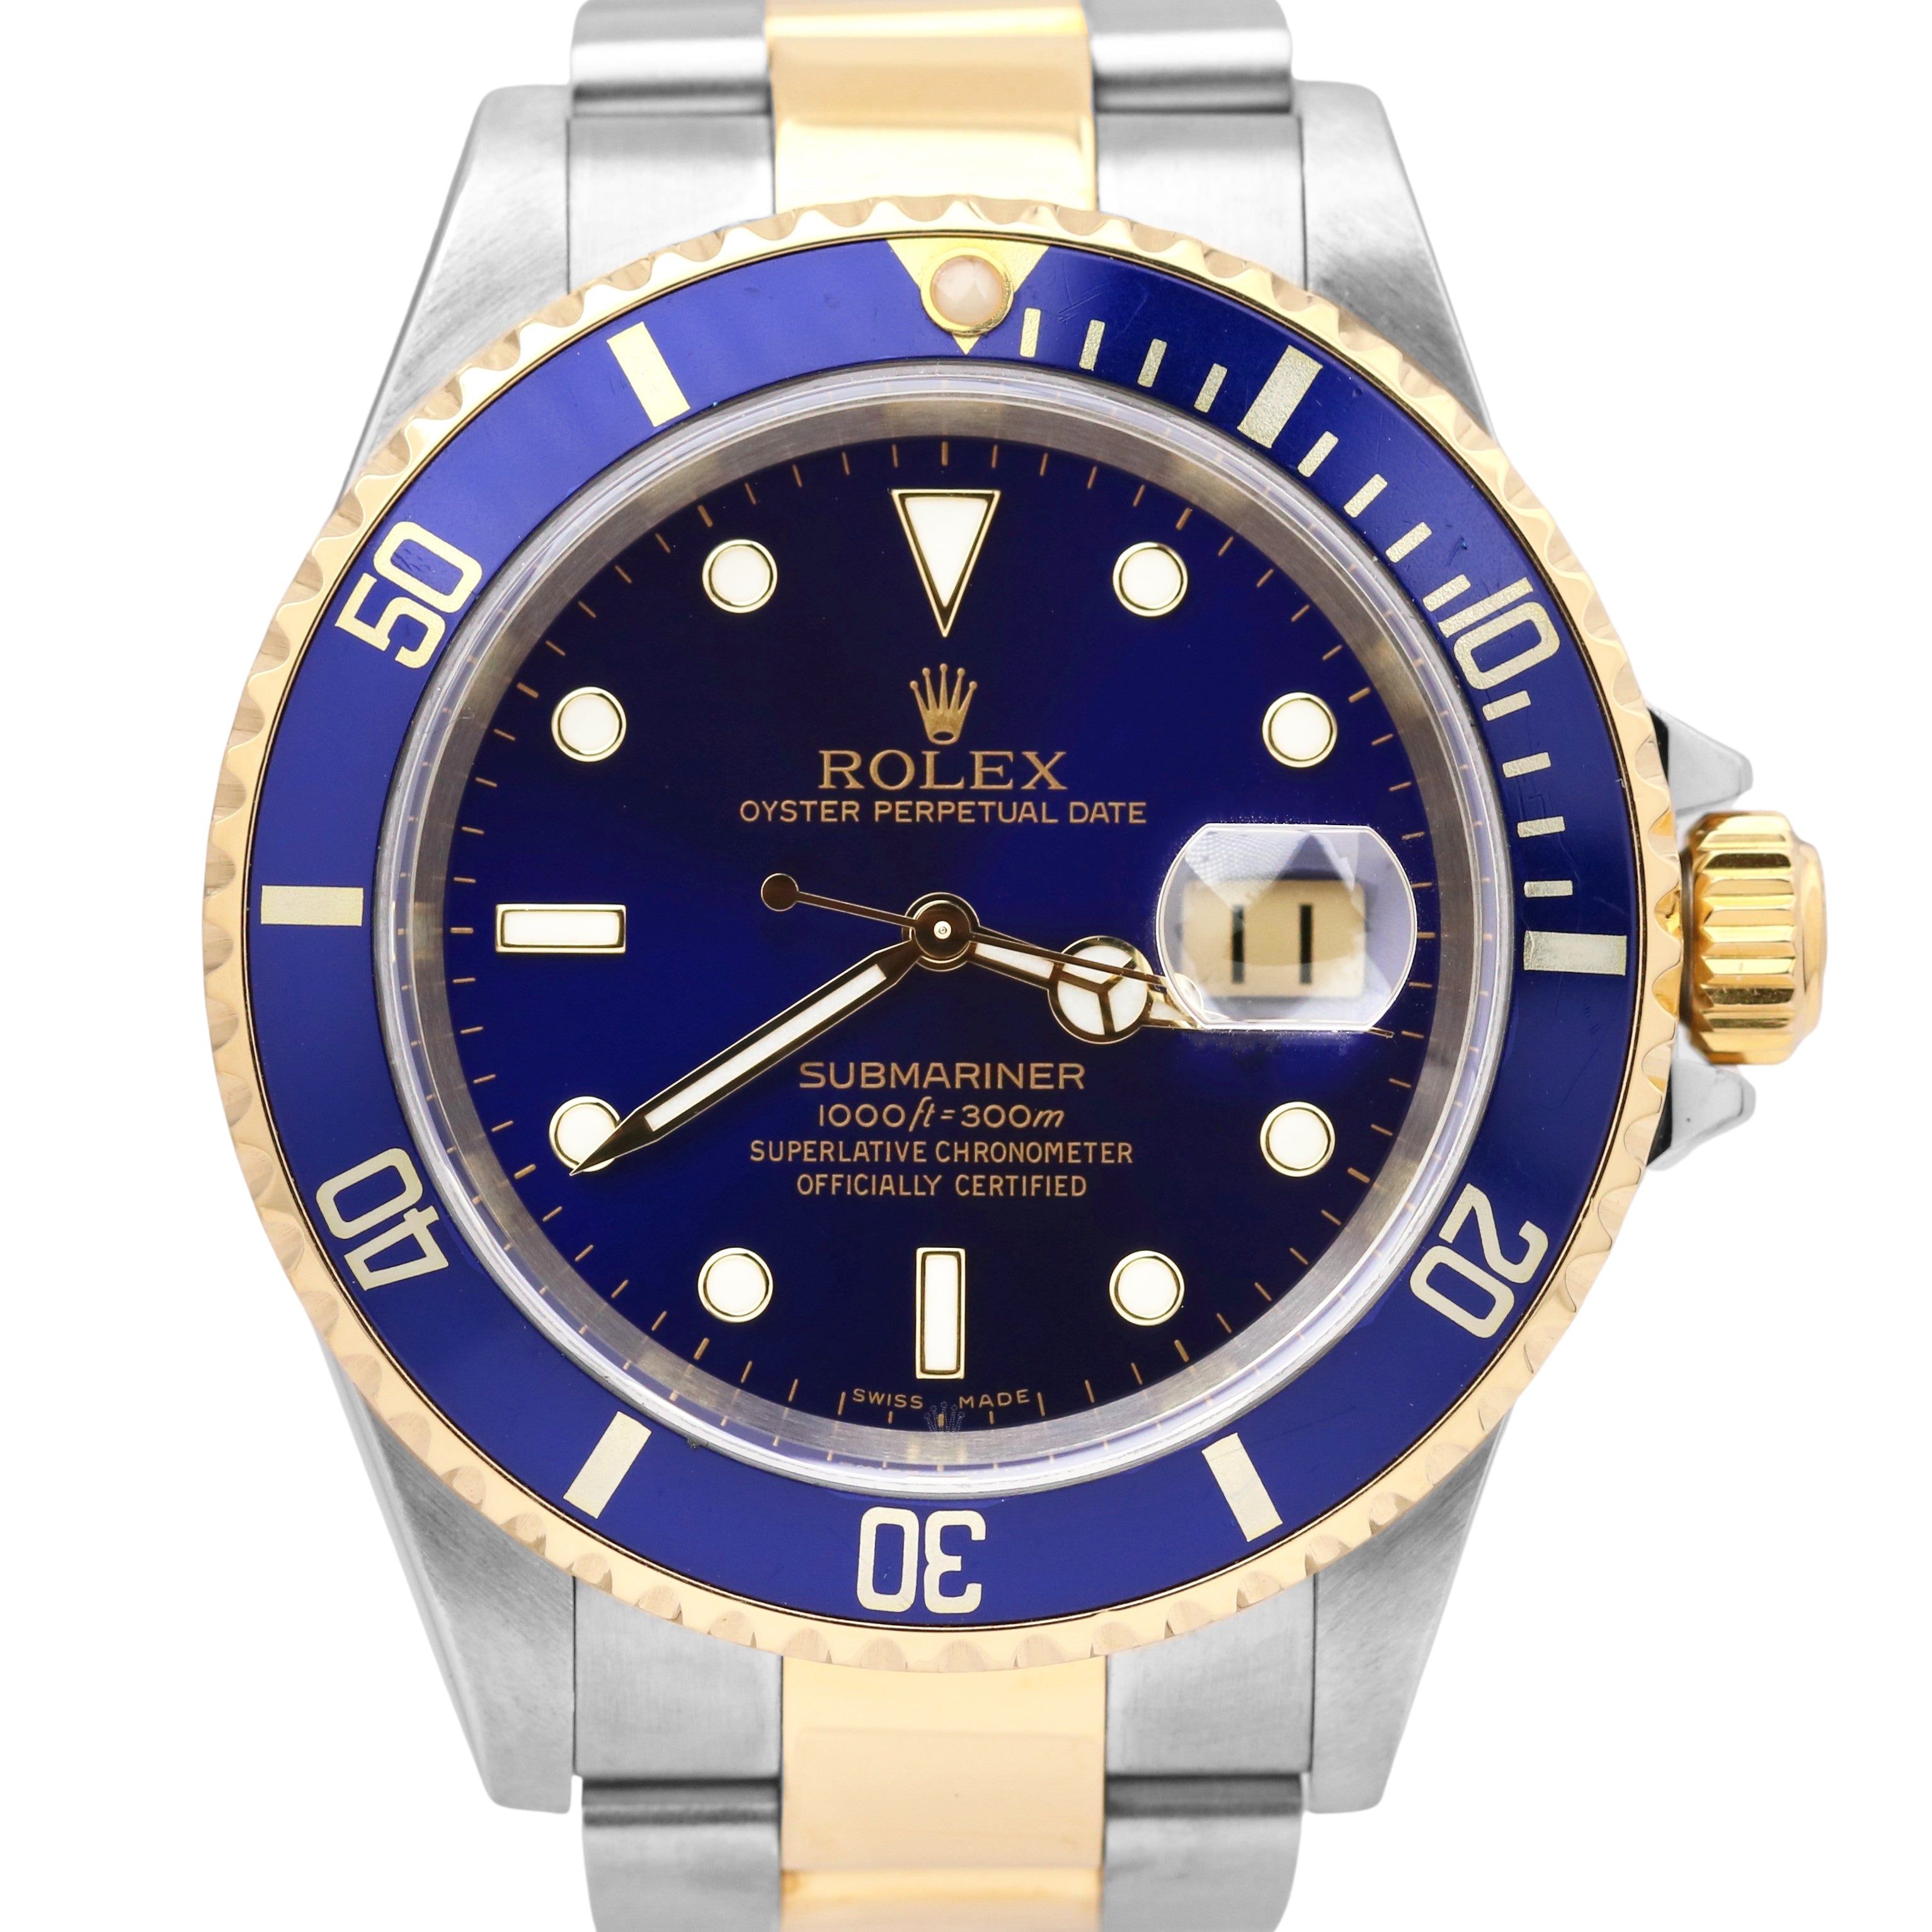 Considering selling Rolex, advise on where to start : r/rolex